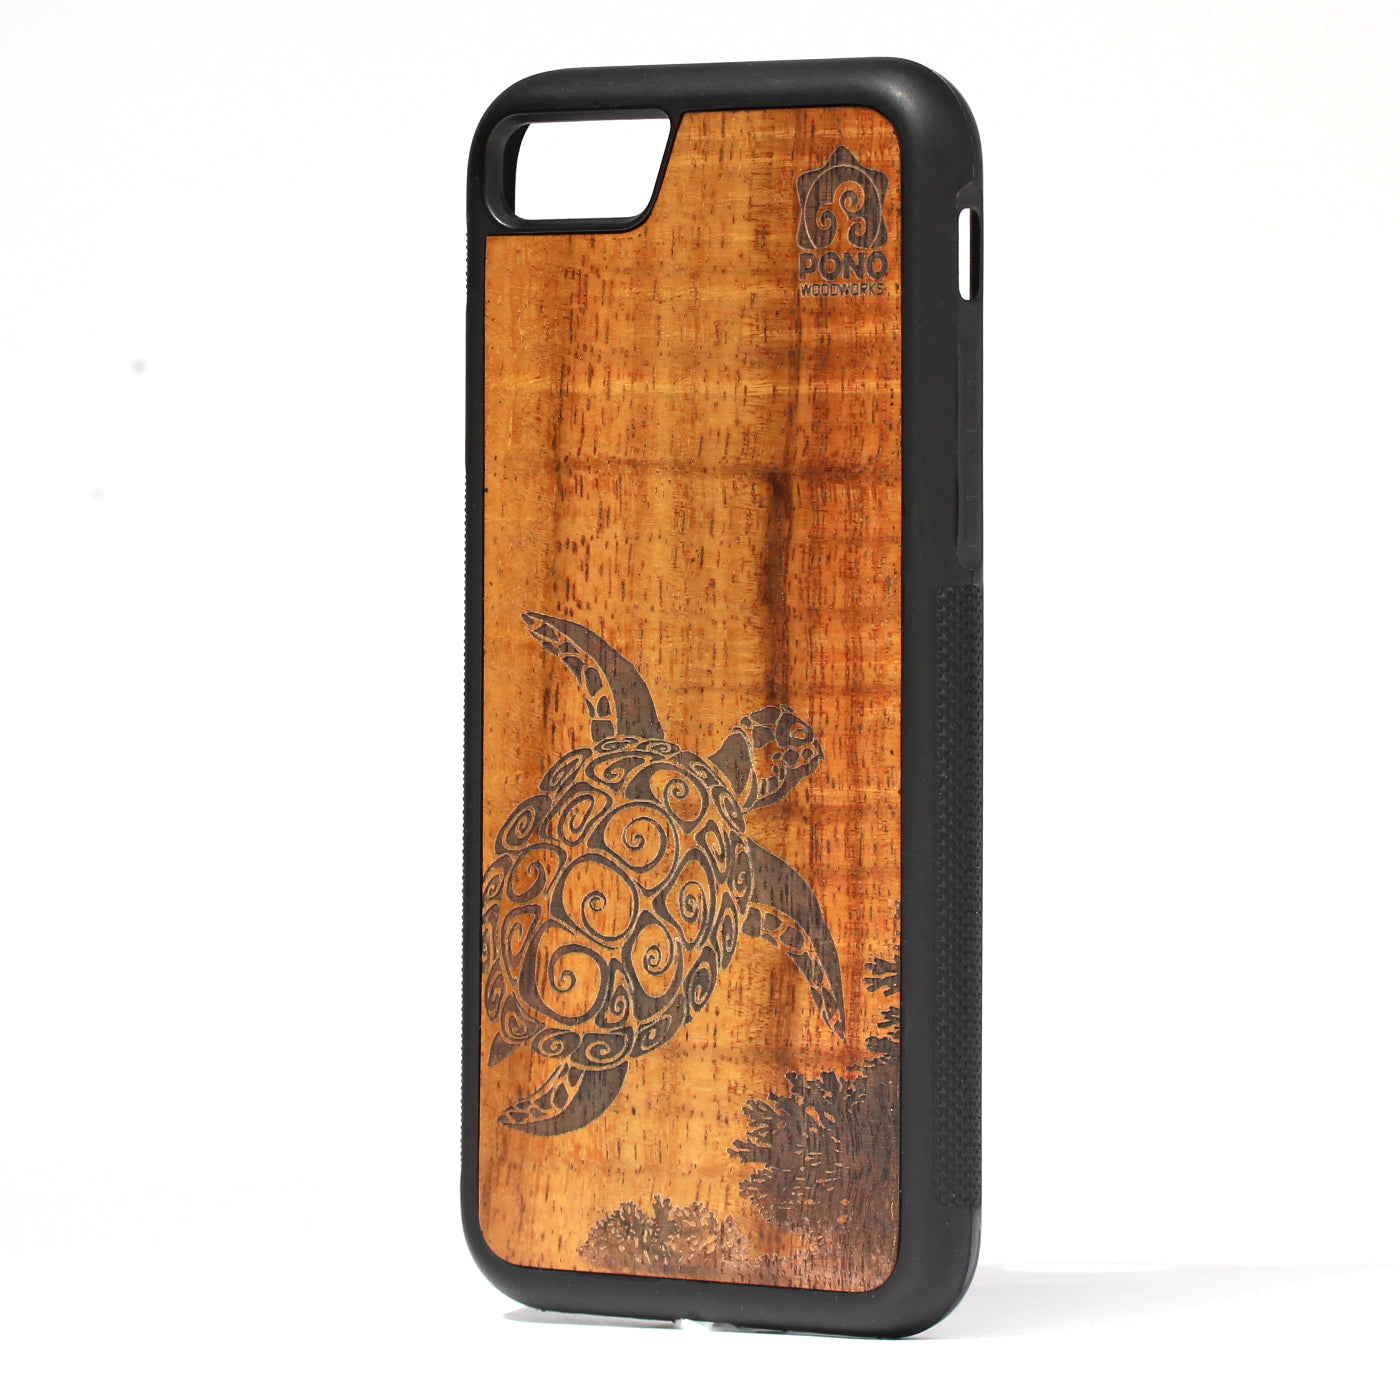 curly koa wood inlay phone case standing upright showing a turtle design laser etched